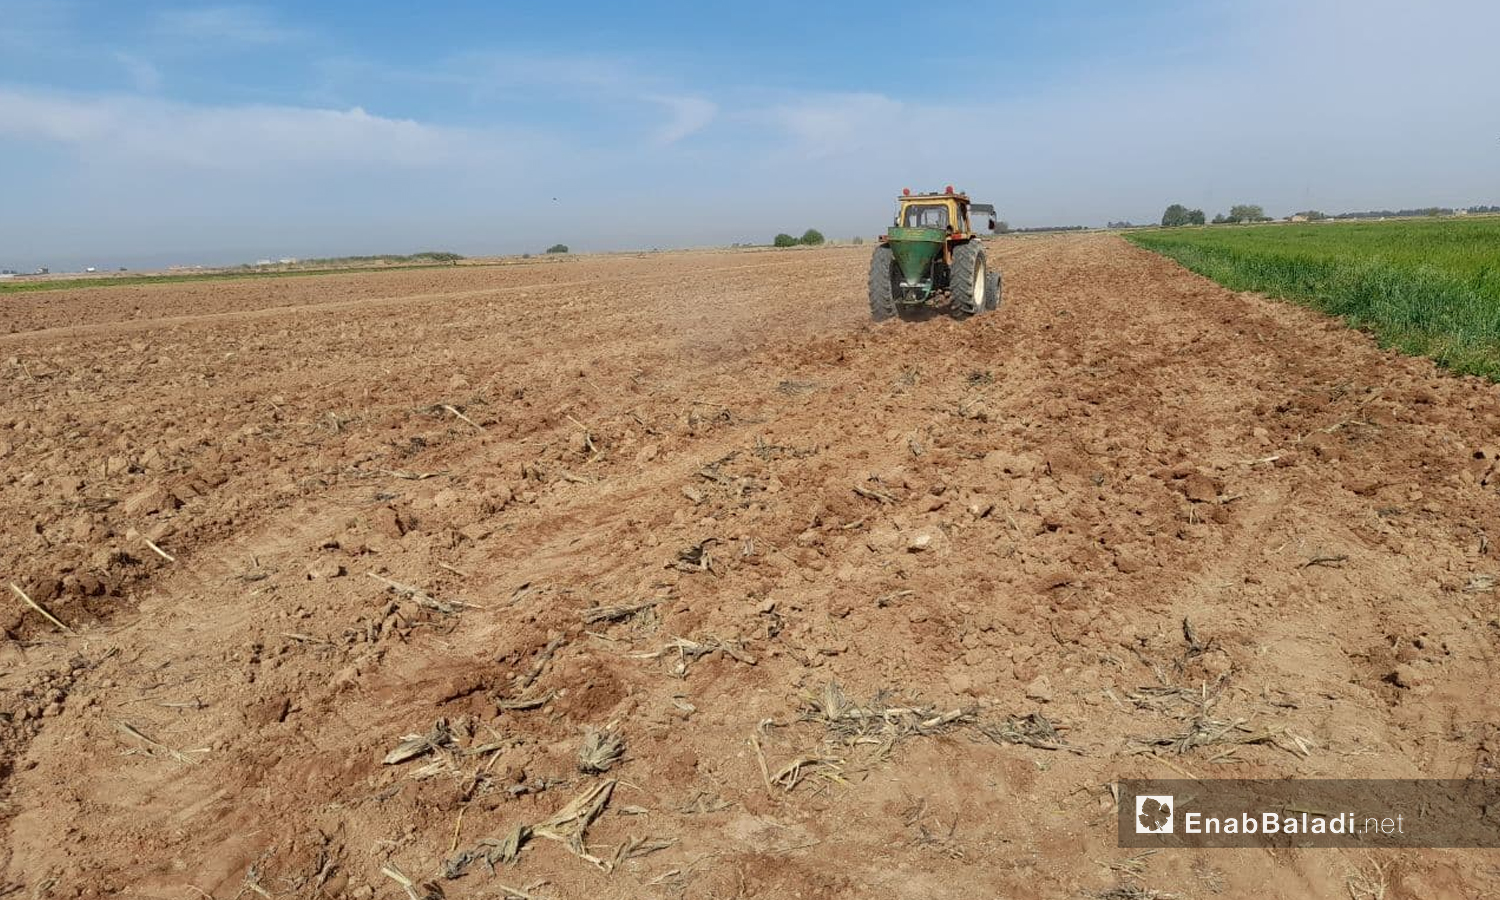 Tractor plowing a piece of land in the northern countryside of Raqqa (Enab Baladi)